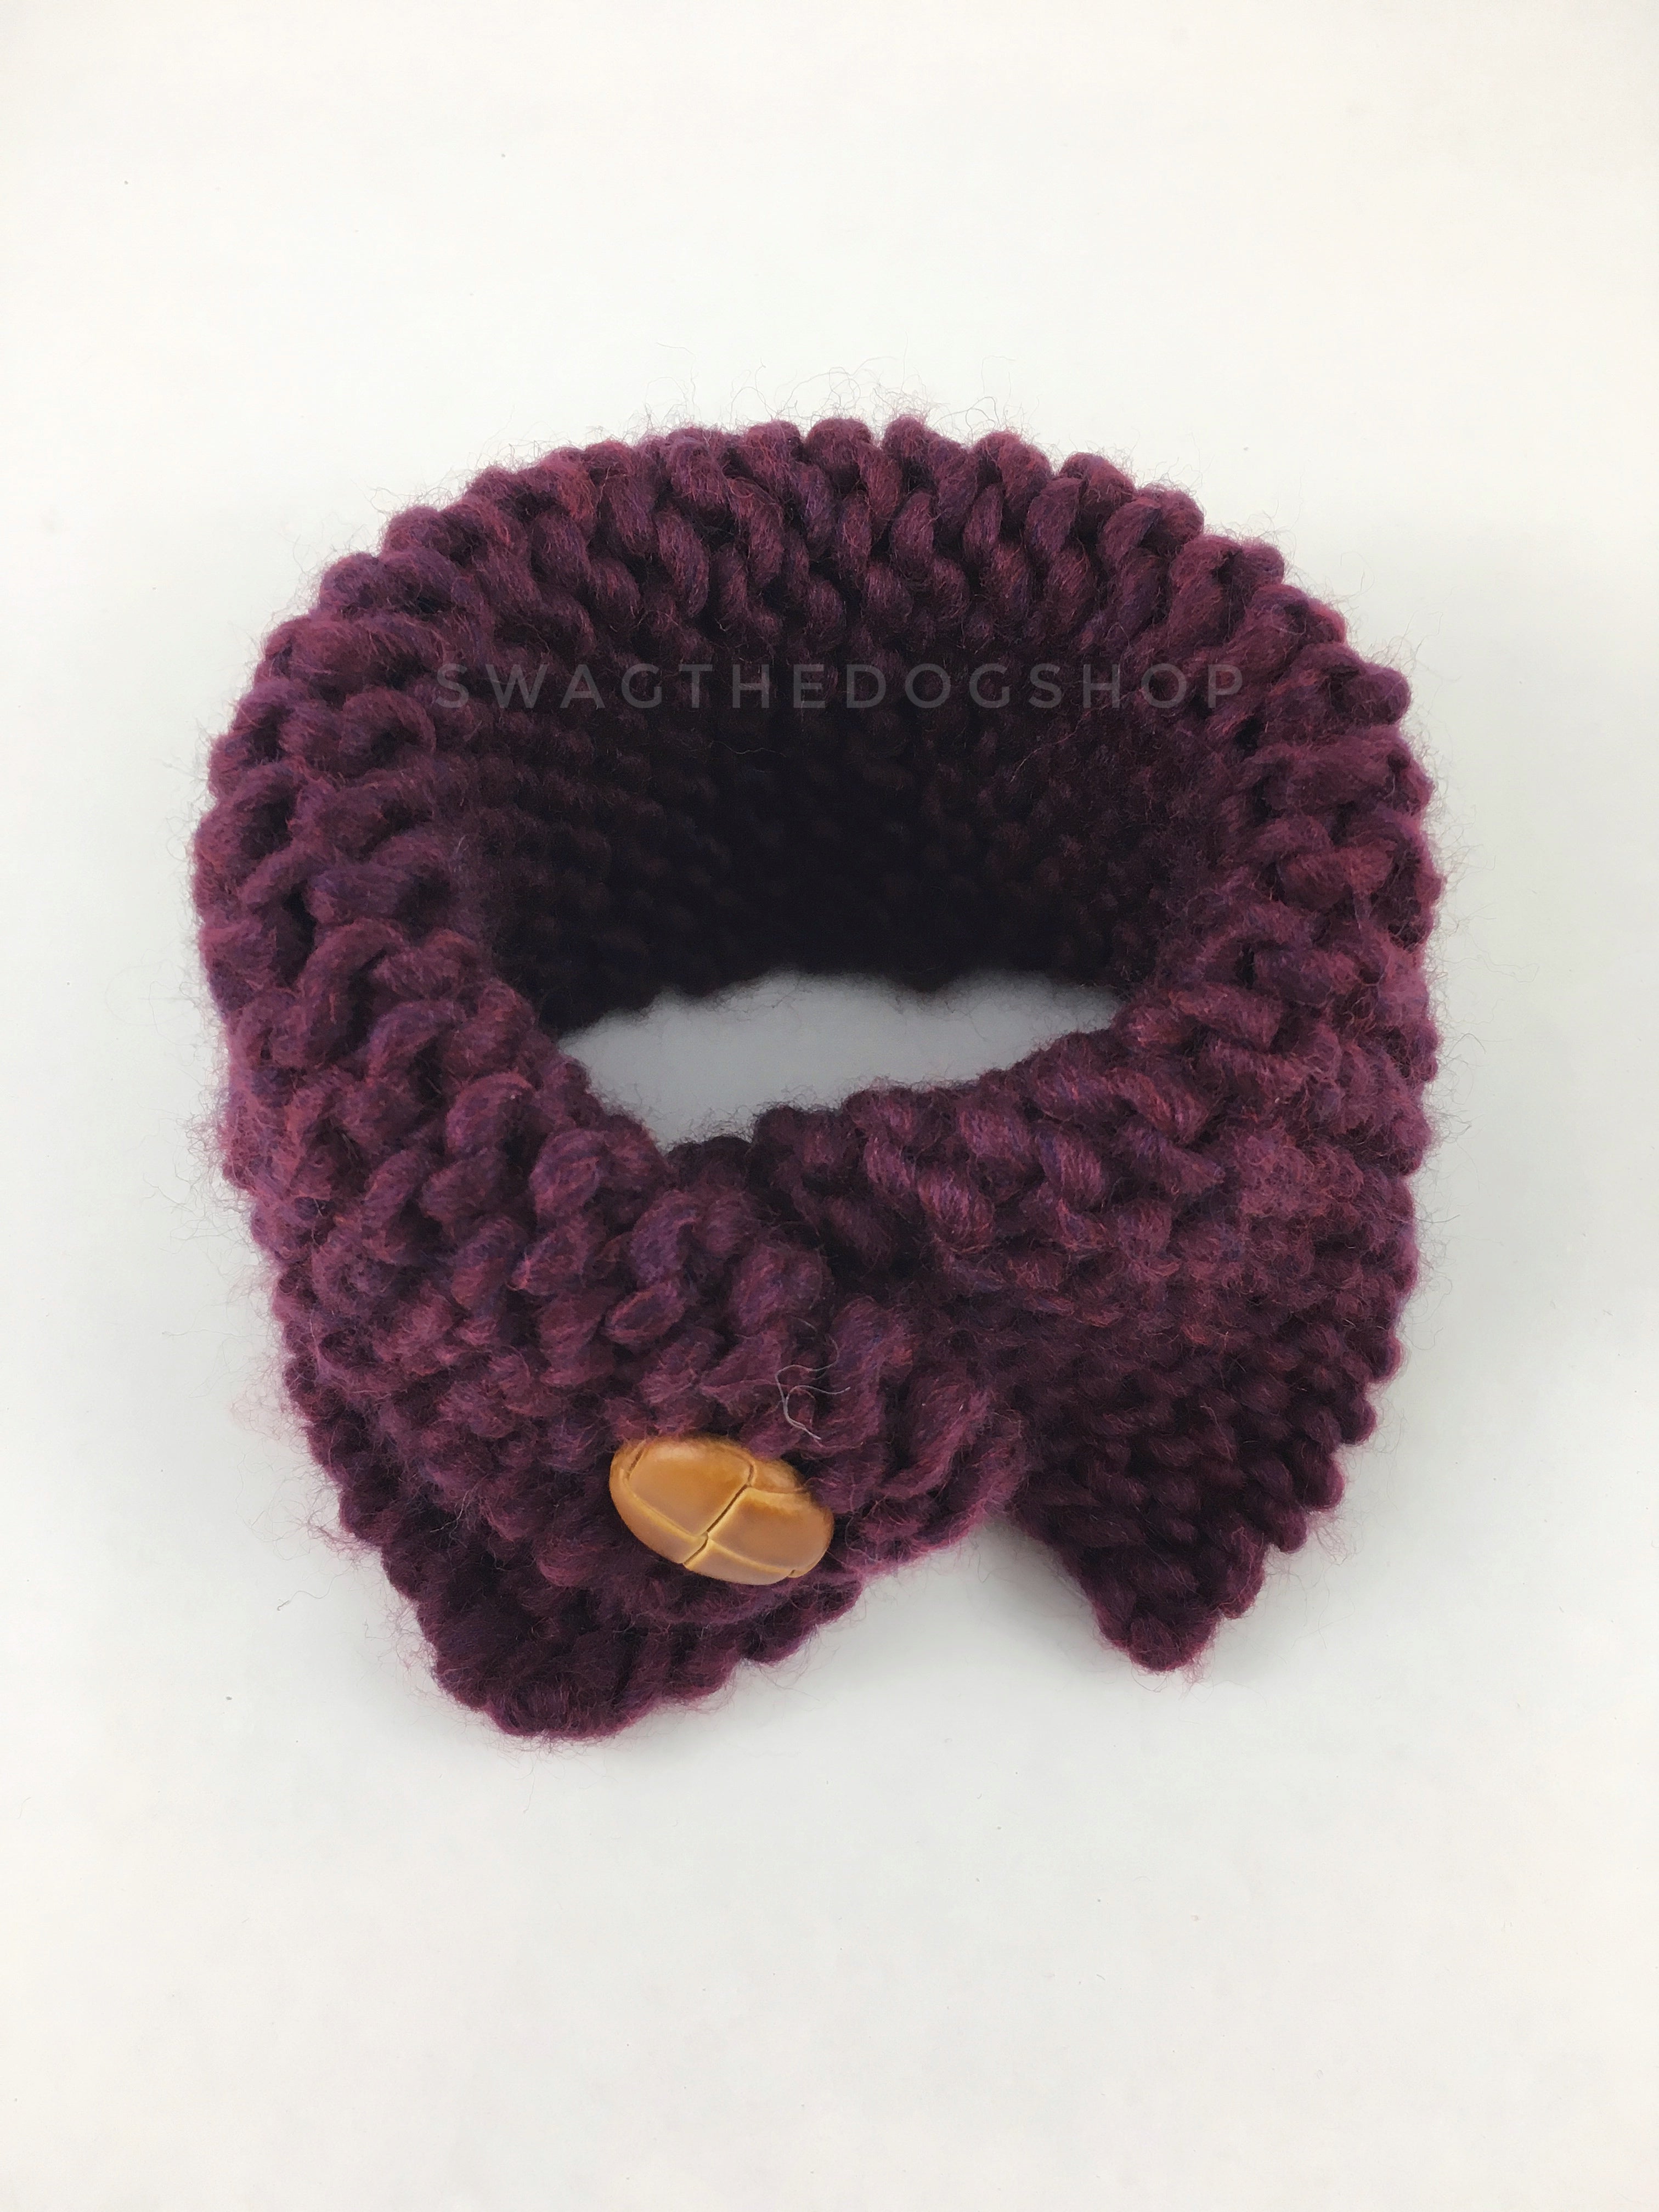 Plum Swagsnood - Product Above View. Plum Color Dog Snood with Accent Button